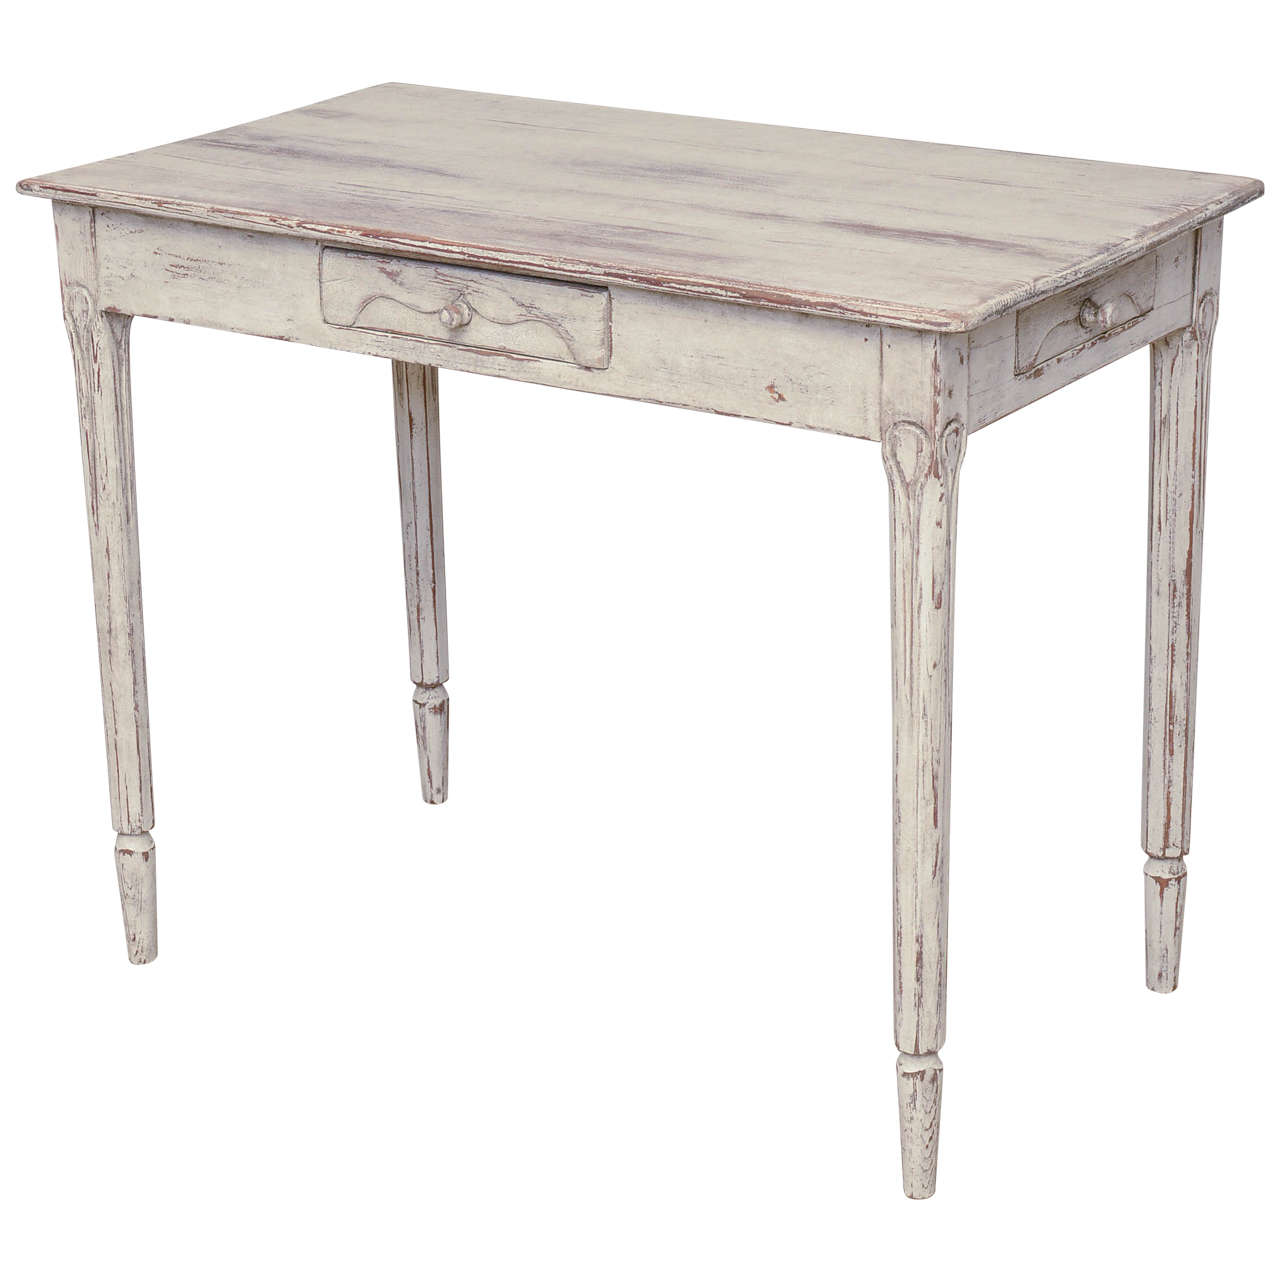 19th Century Antique Swedish Gustavian Table with Three Drawers